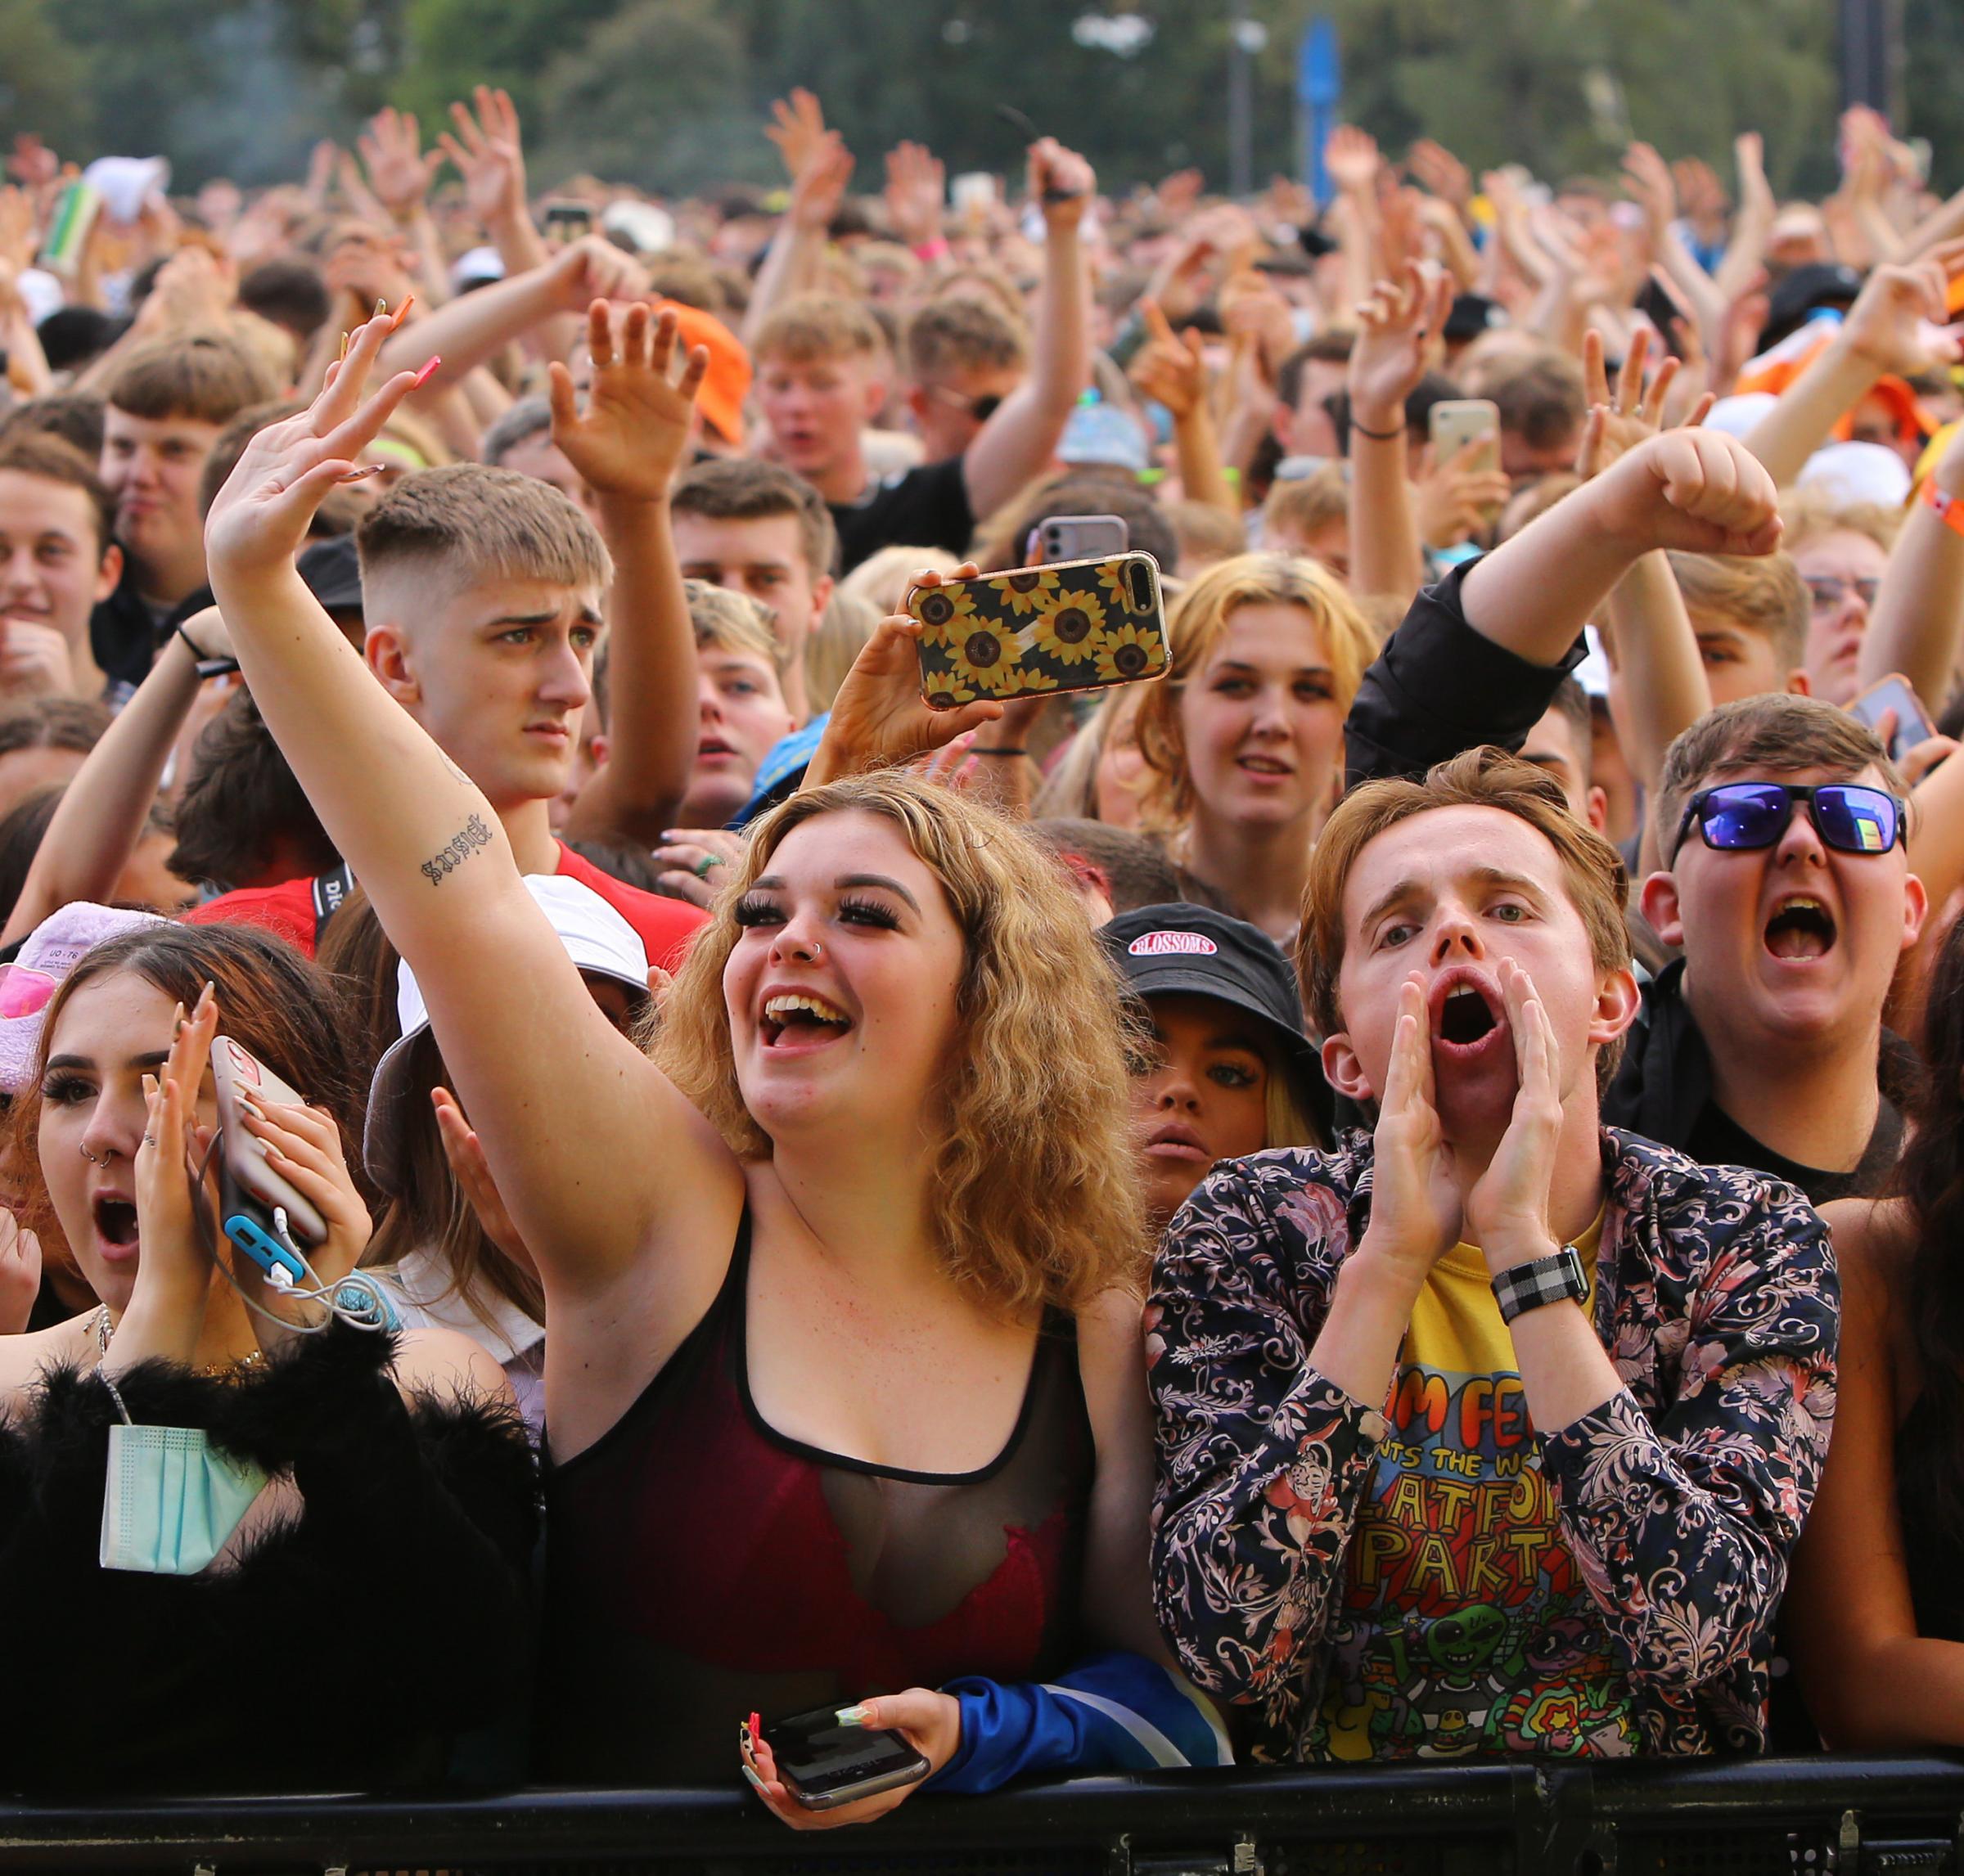 TRNSMT music festival at Glasgow Green brings music fans to the city